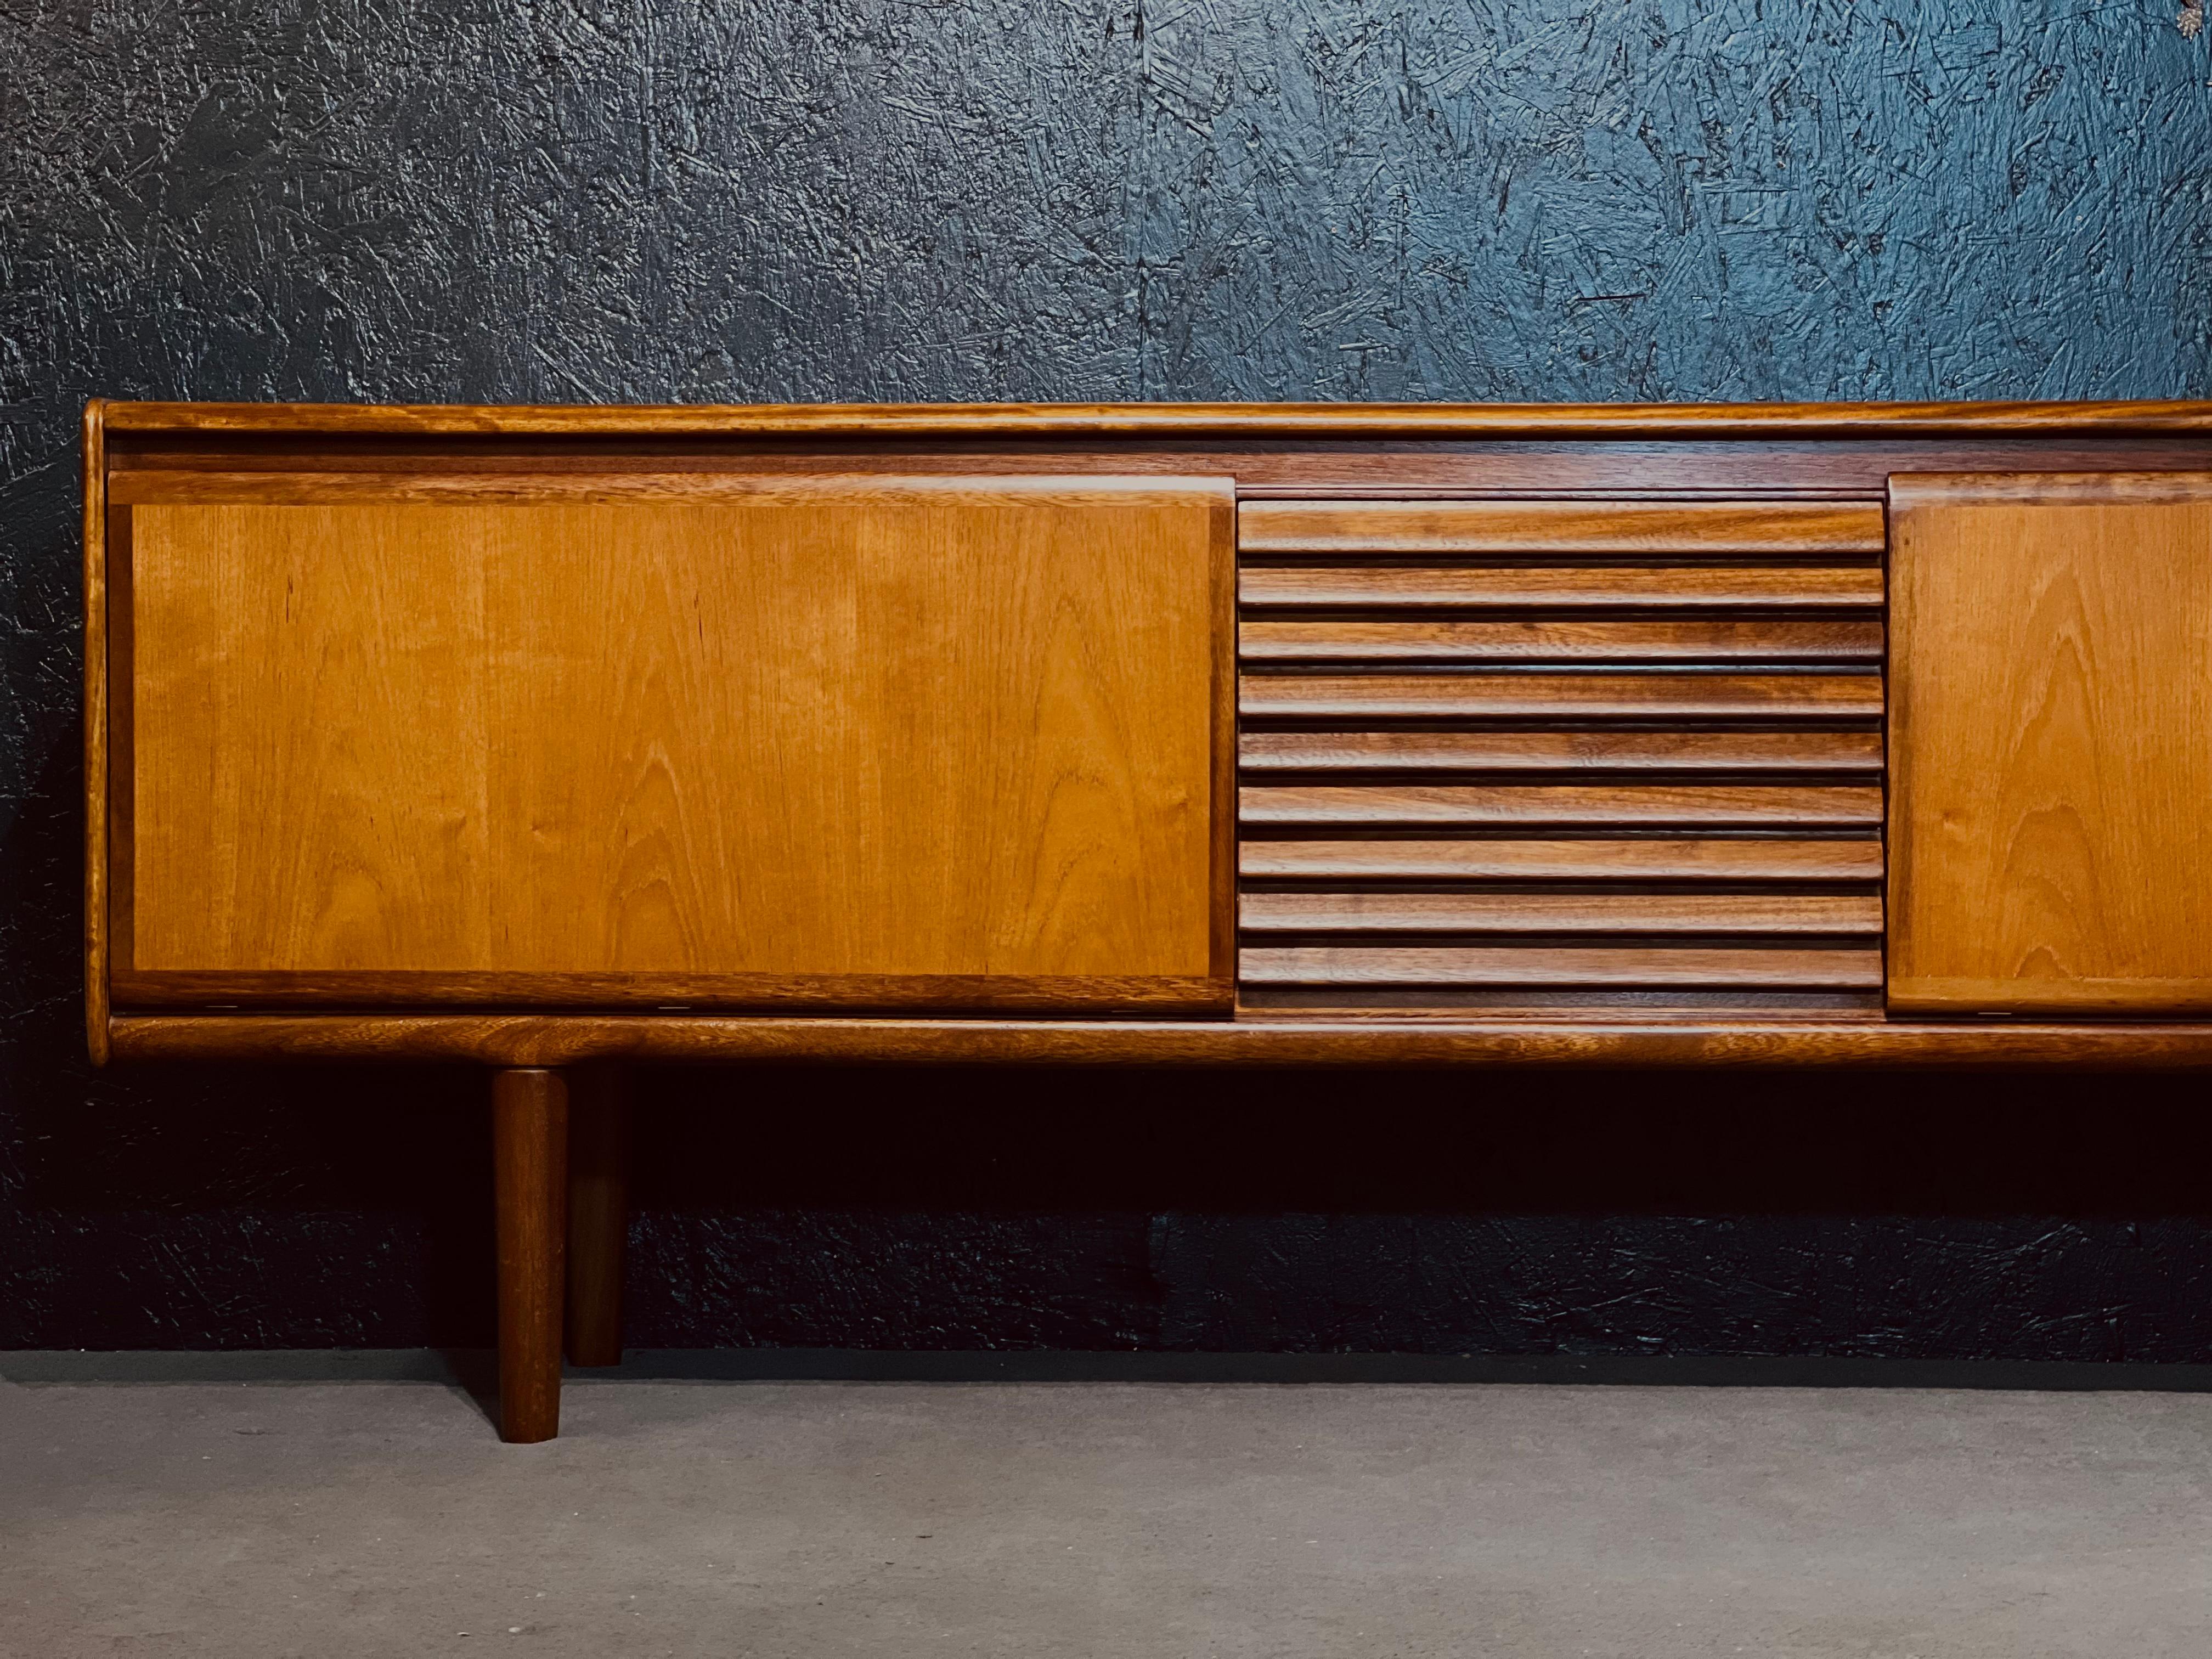 Impressive teak sideboard from the English brand White and Newton. Under the design direction of the talented Arthur Edwards, the firm produced stunning high-end furniture often defined by its clean modern lines and the contrast made by the